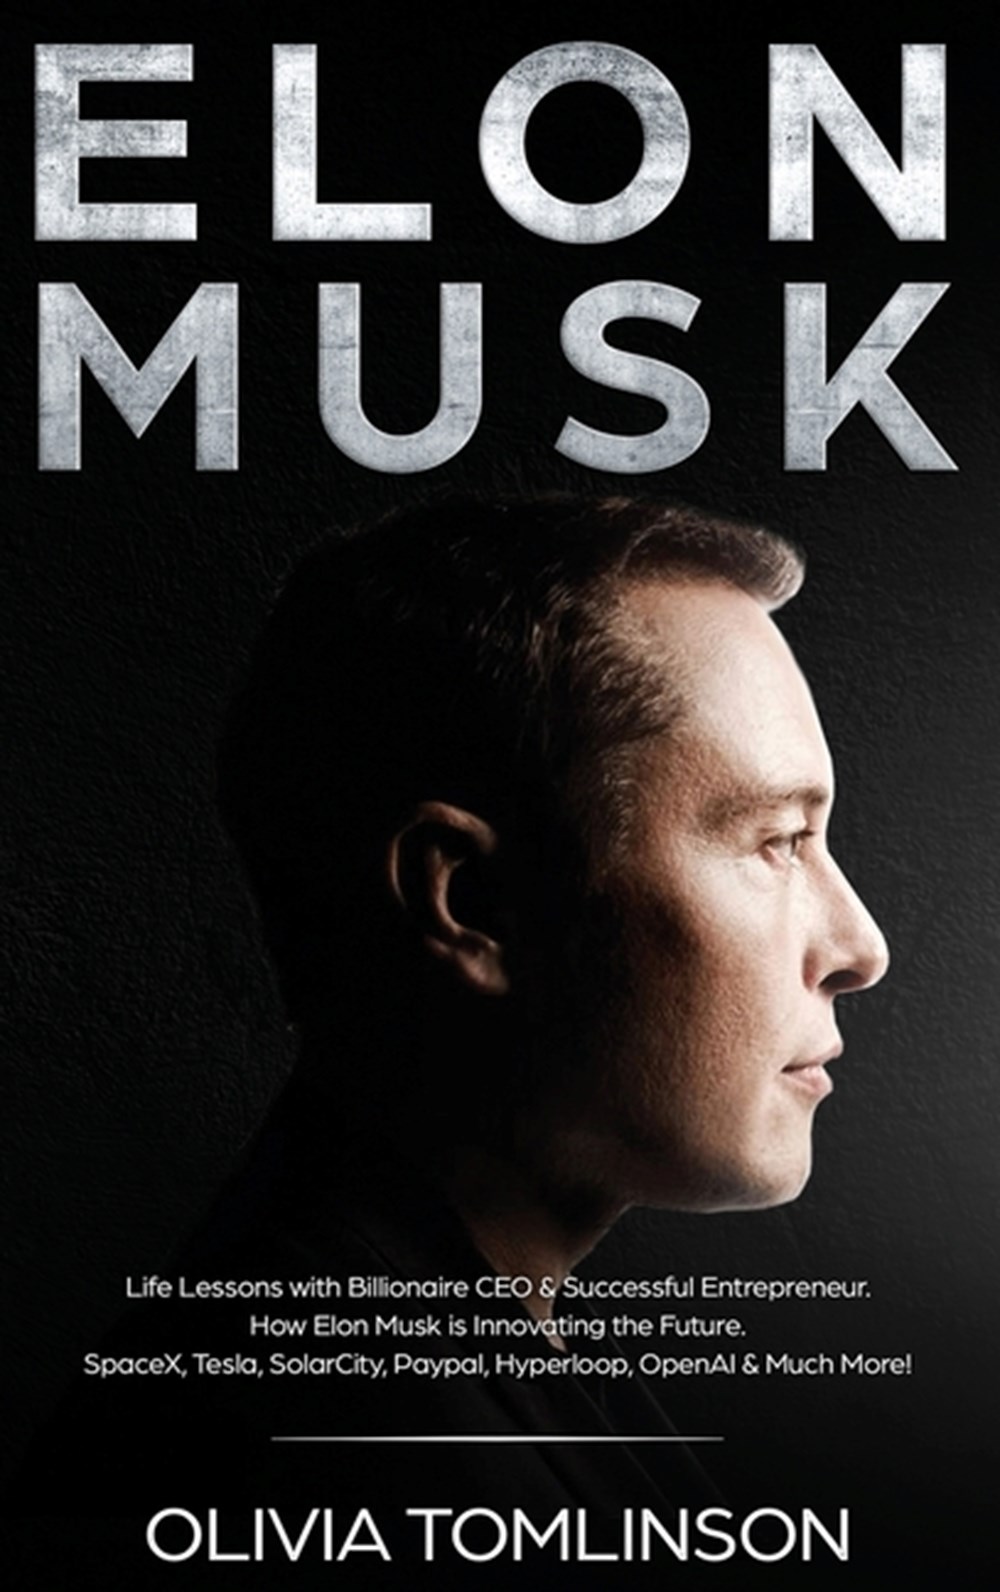 Elon Musk Life Lessons with Billionaire CEO & Successful Entrepreneur. How Elon Musk is Innovating t